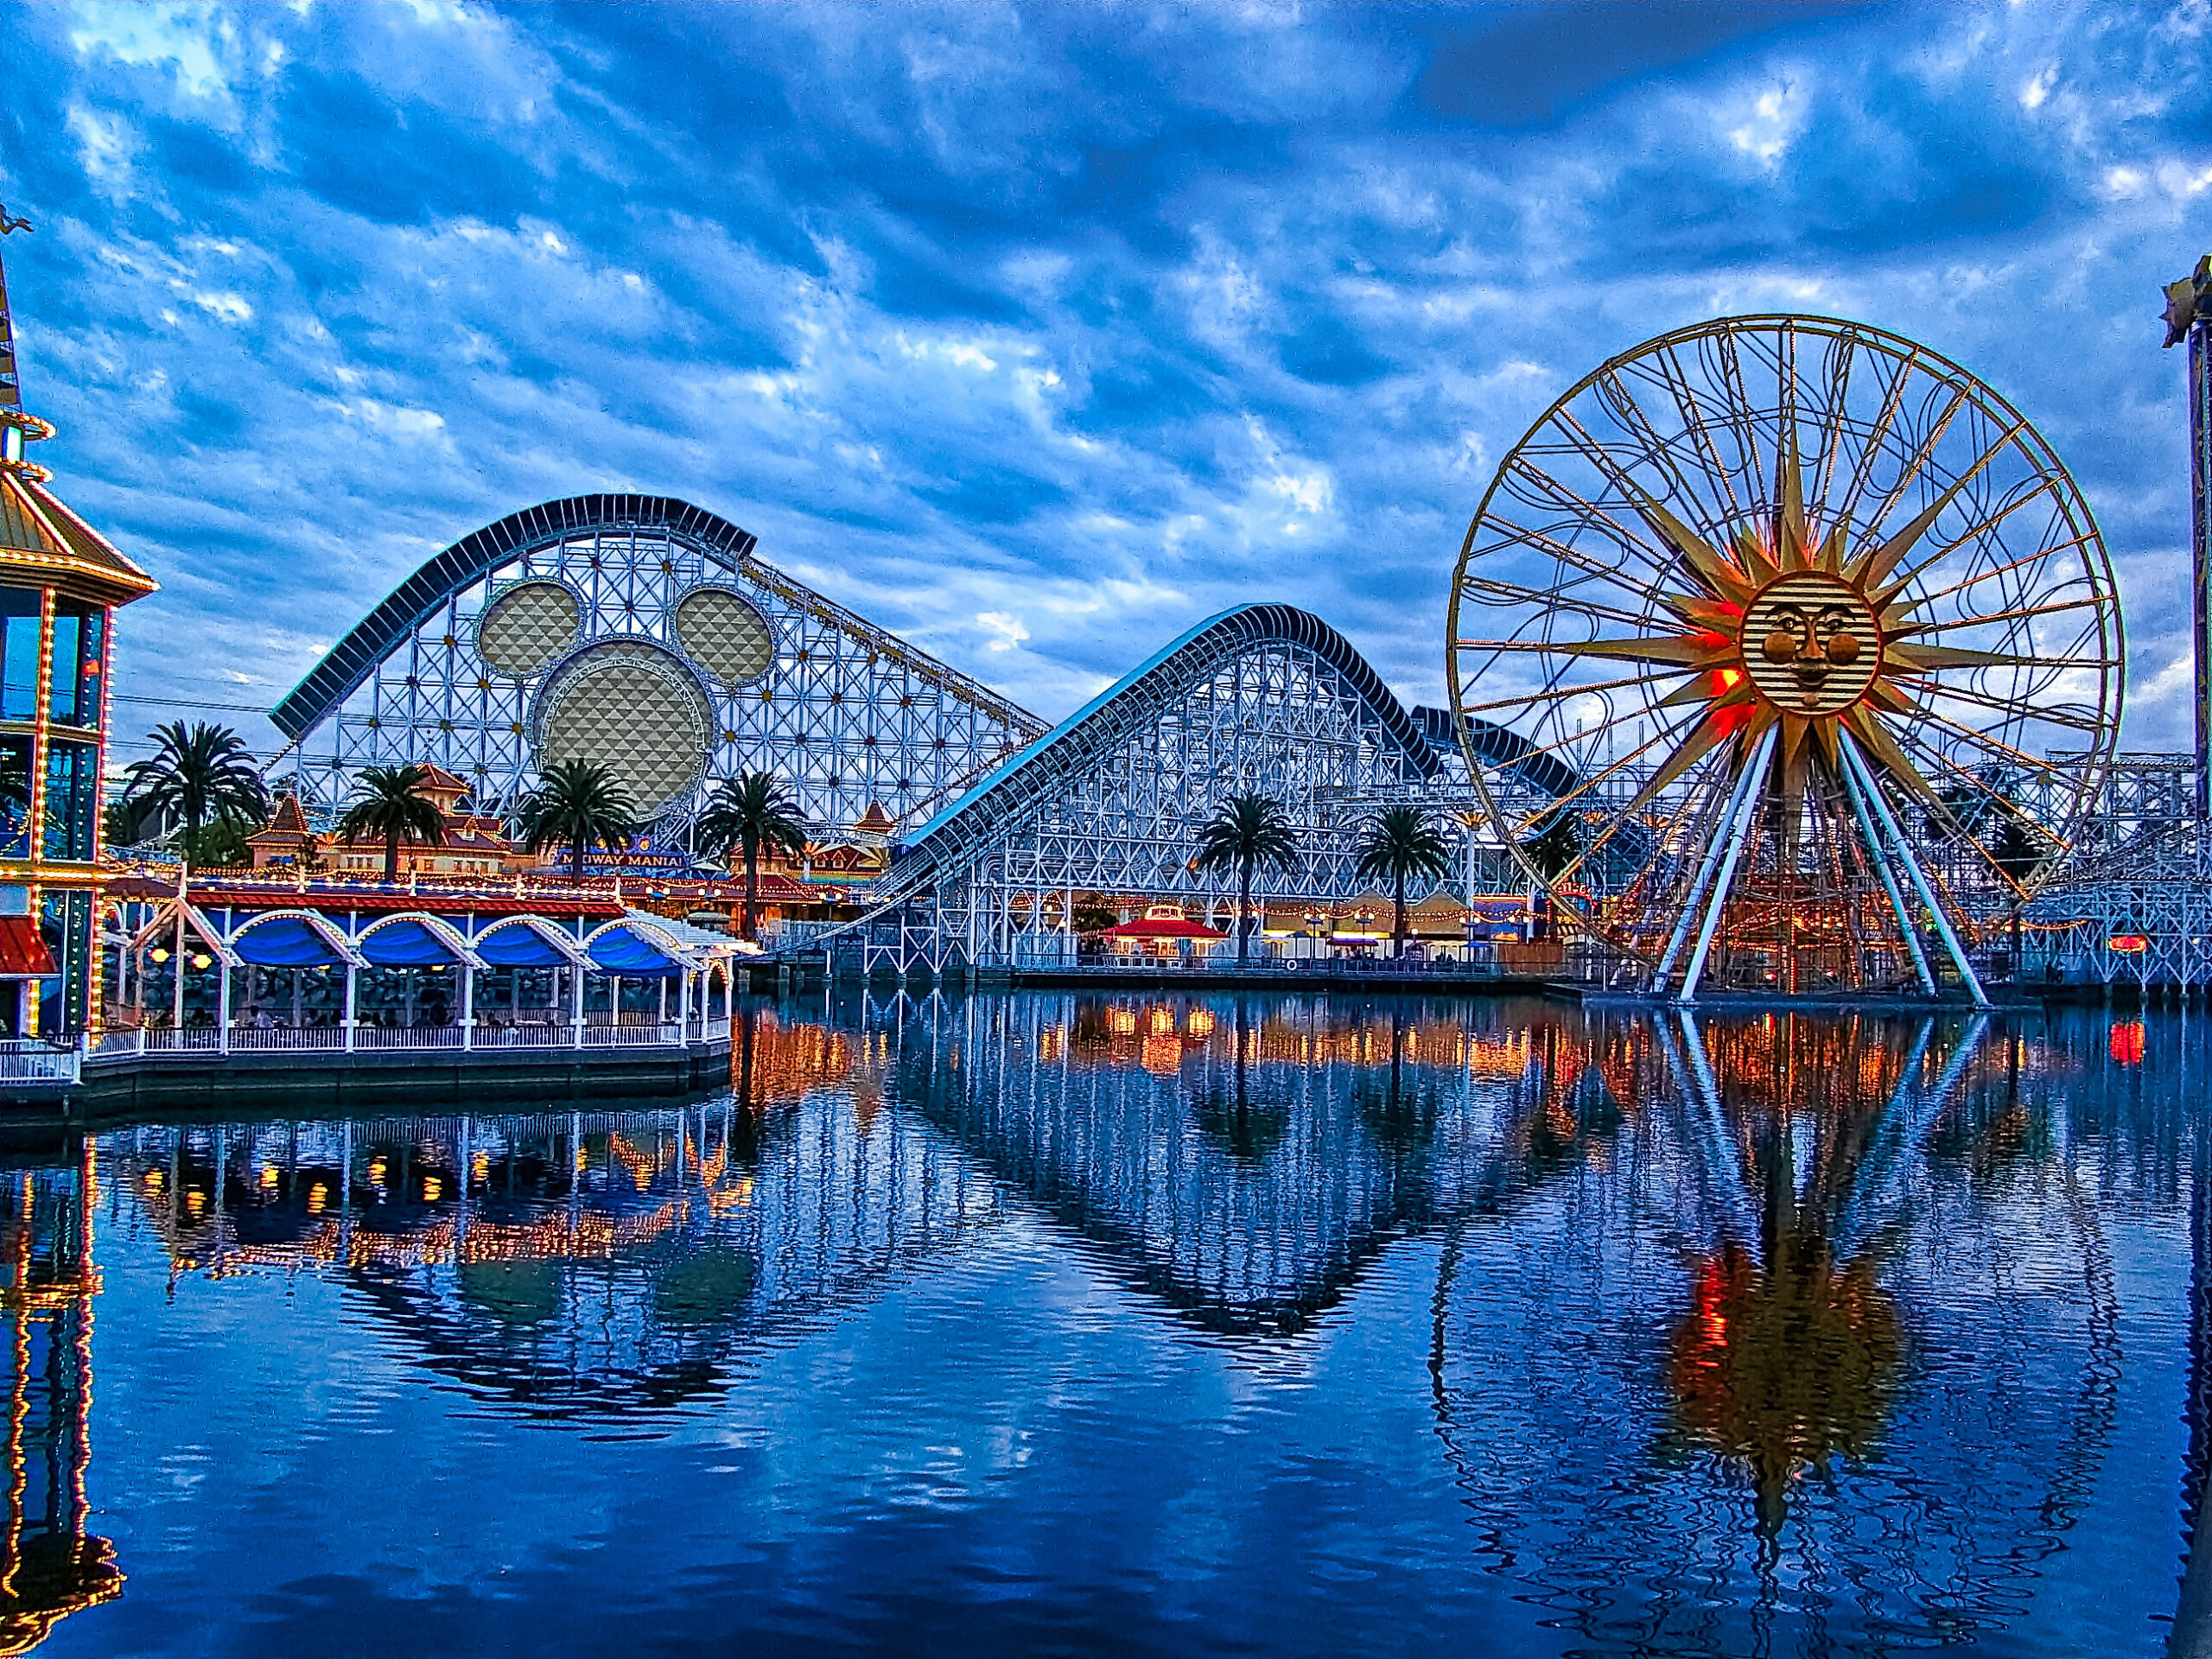 Theme Parks & Attractions Near Our Orlando Resort